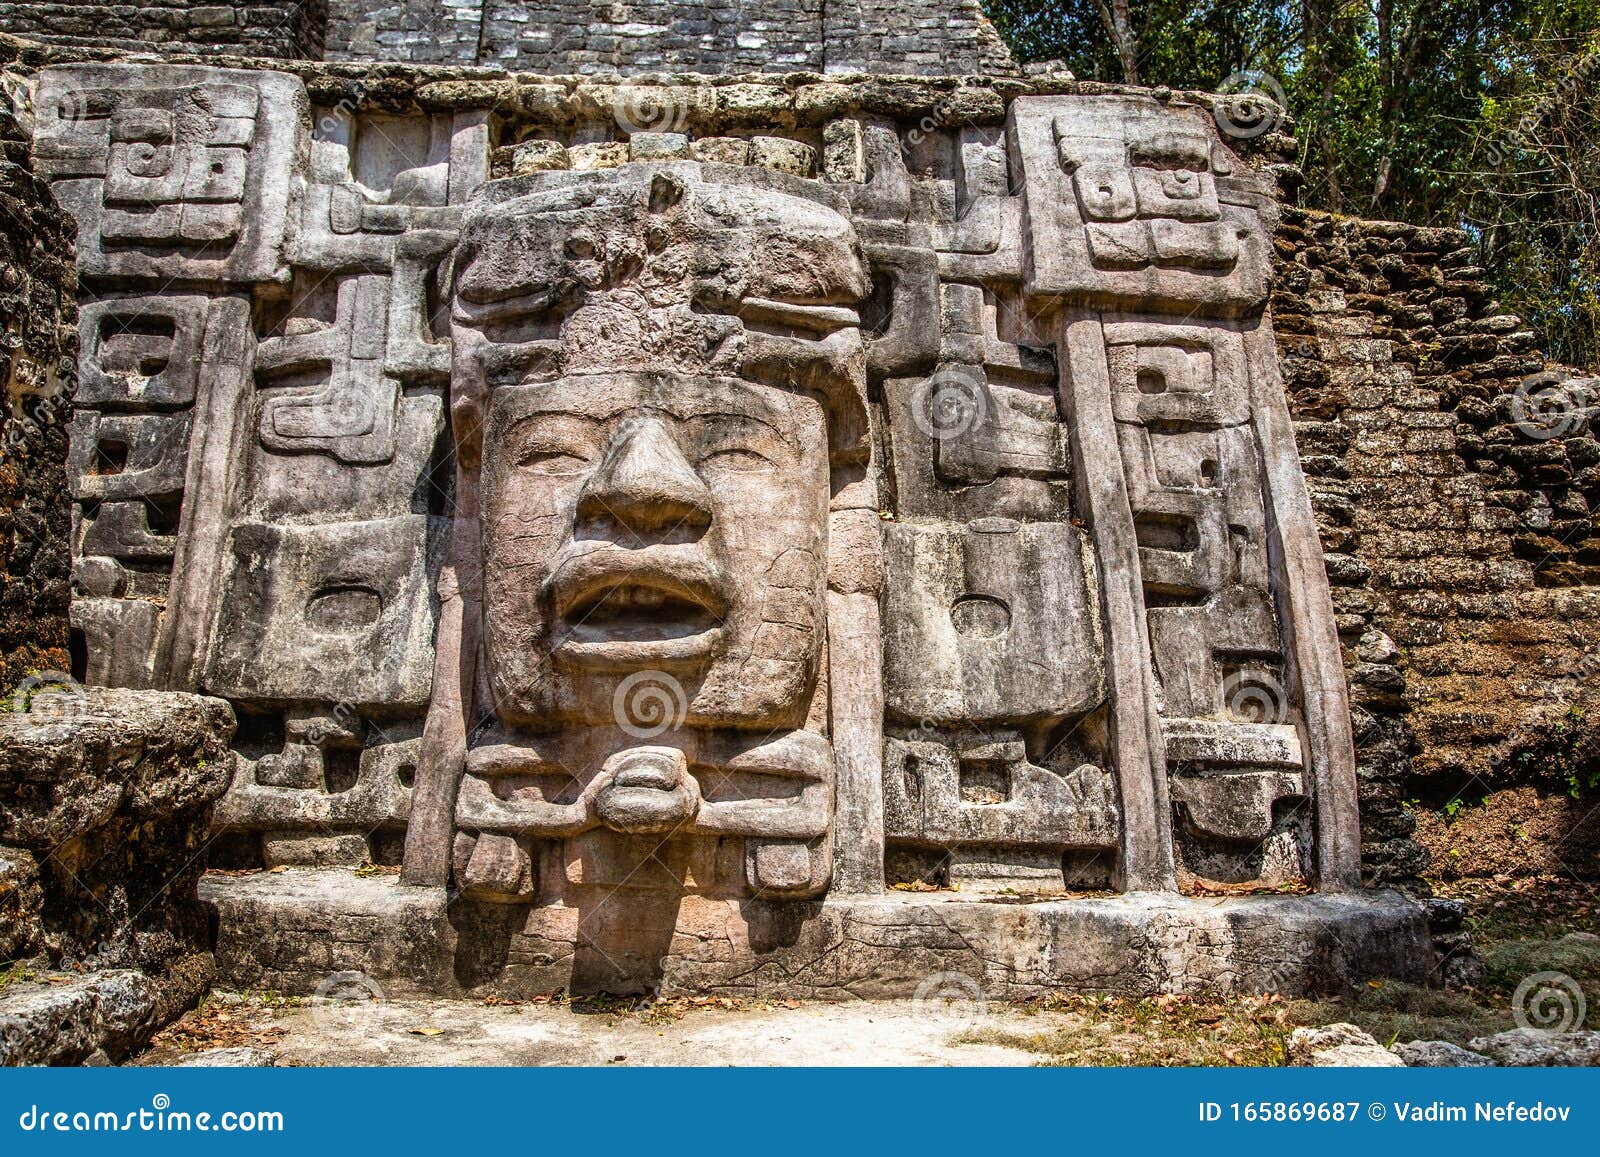 old ancient stone mayan pre-columbian civilization carved face and ornamen88t, lamanai archeological site, orange walk district,